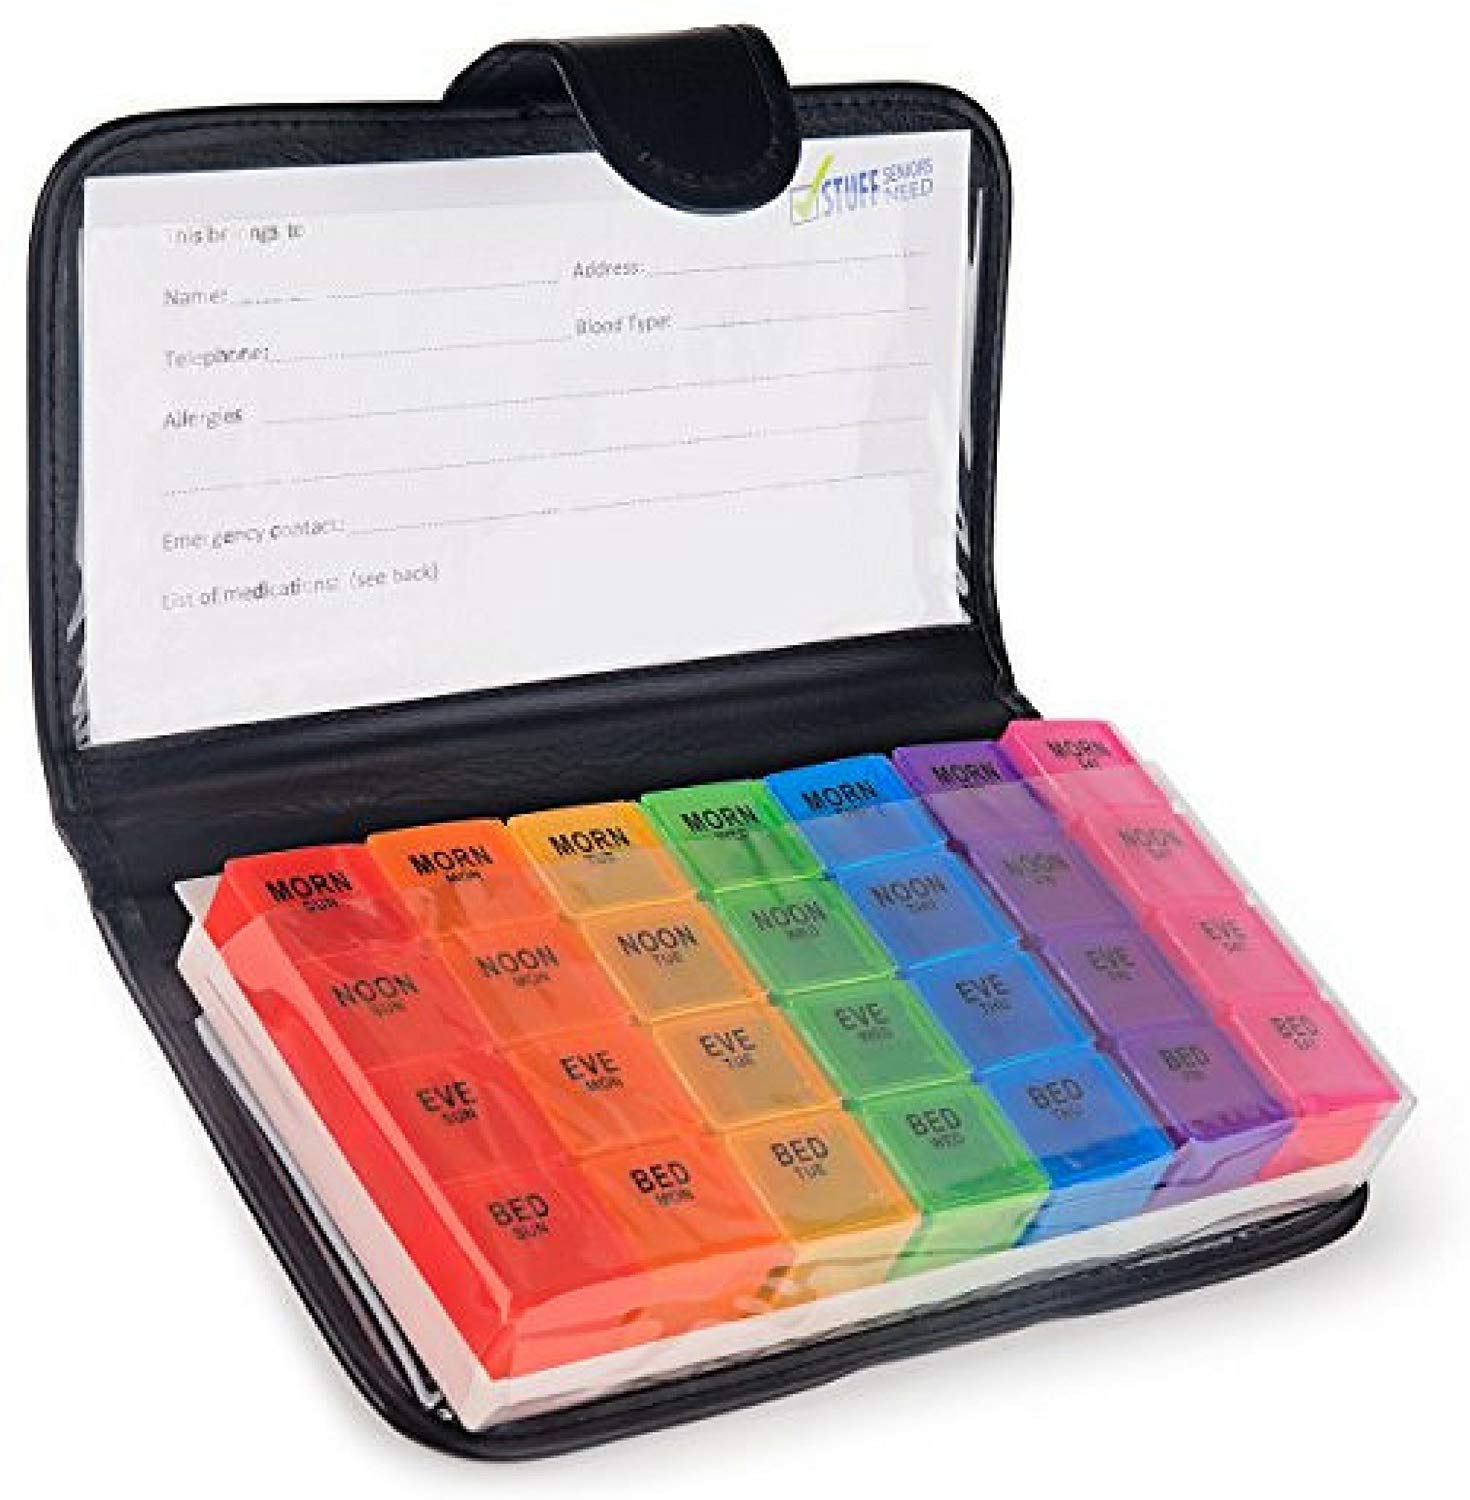 Pill organizer for people with chronic illness and brain fog.